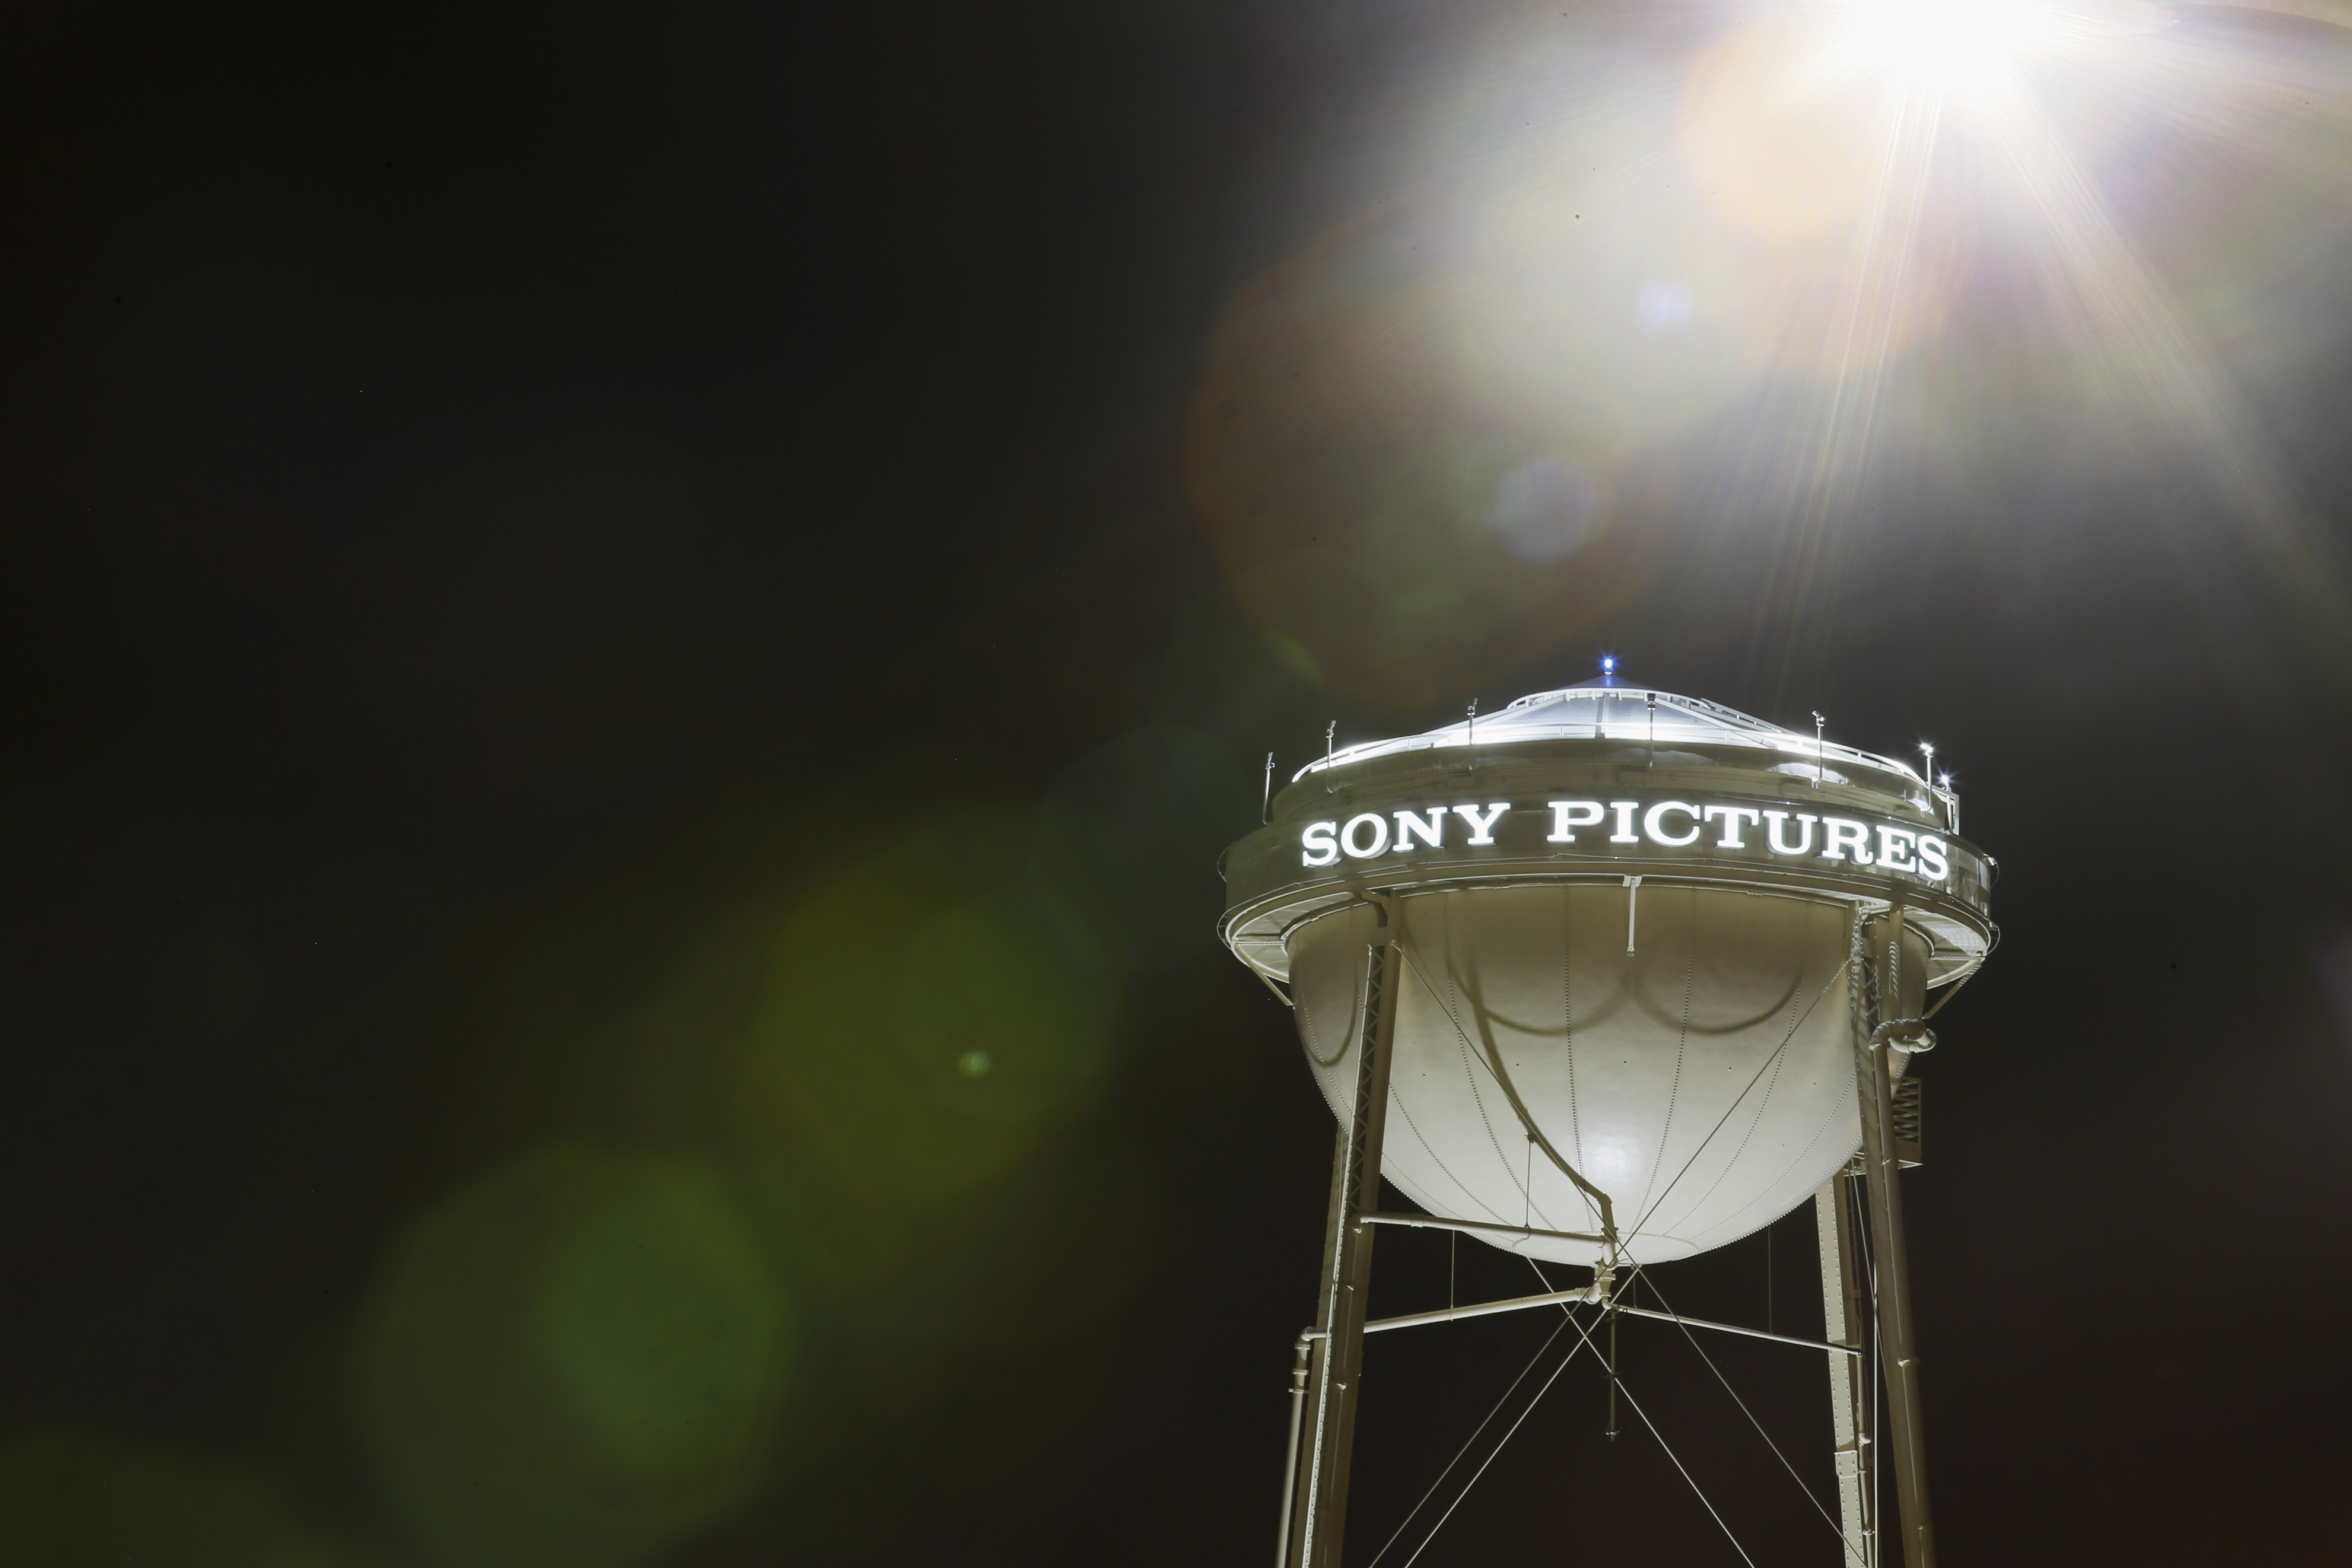 Sony Pictures Entertainment Inc. Studios As Cyber Attack Repercussions Continue